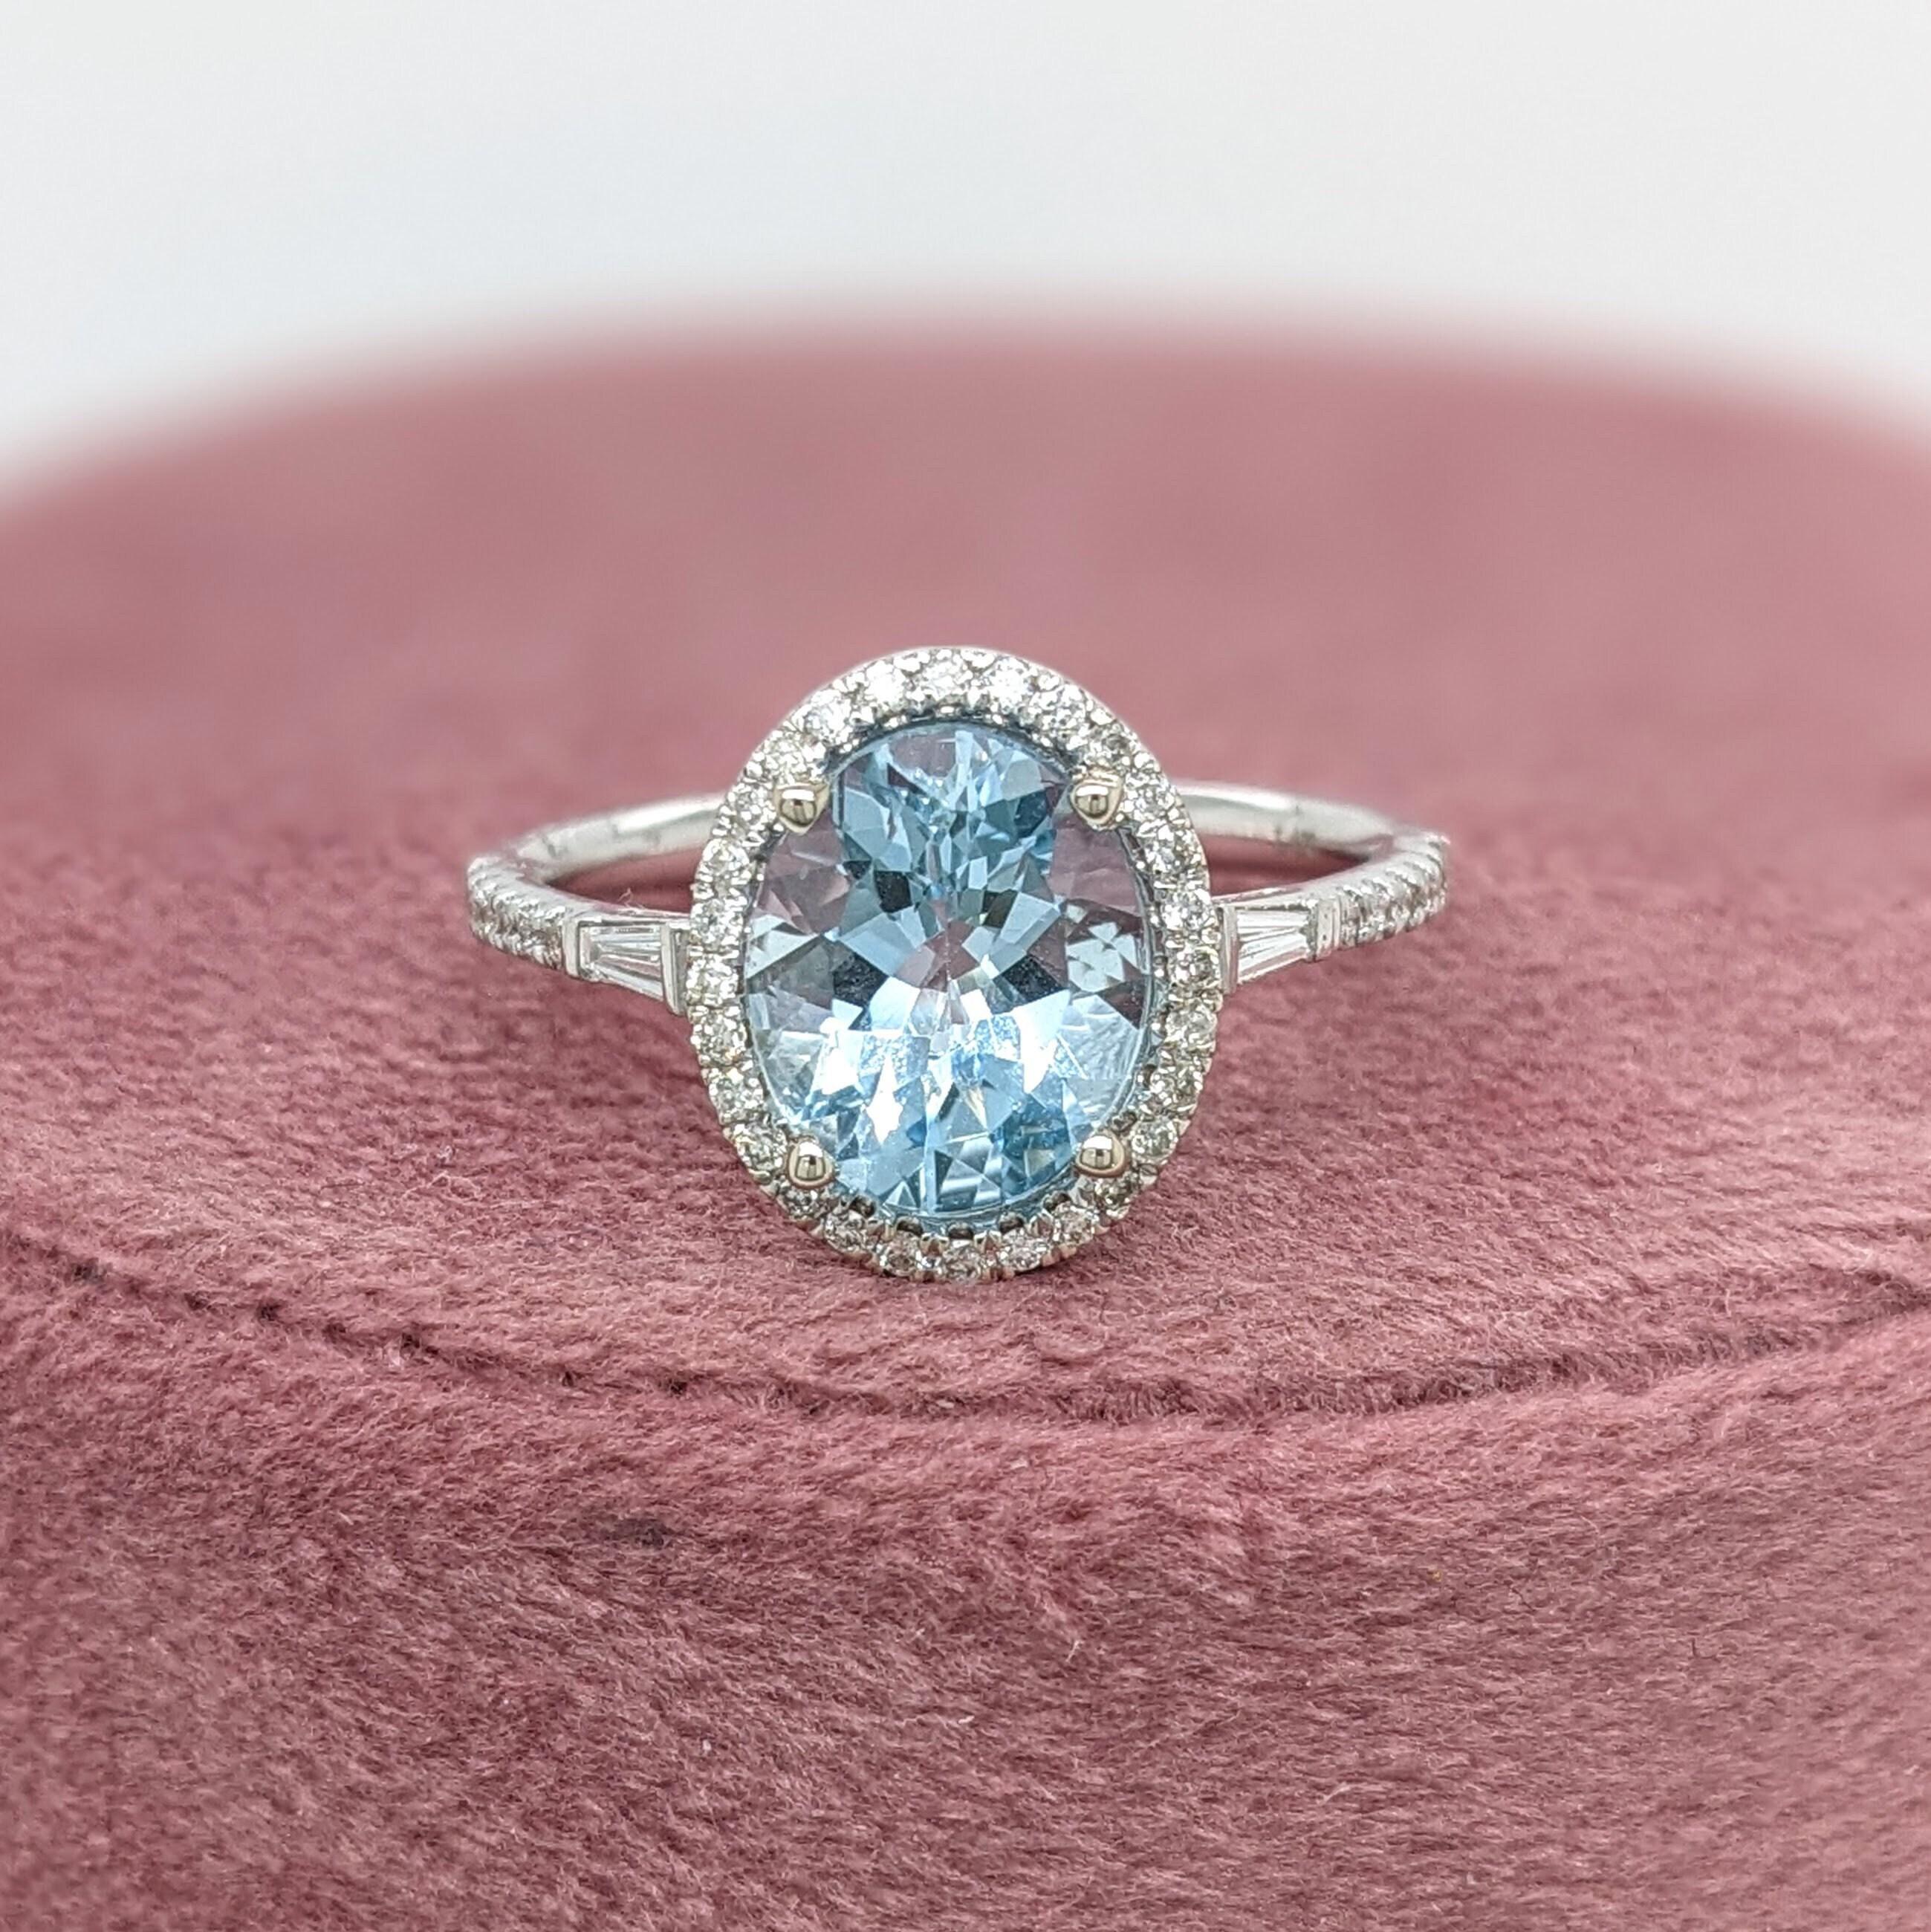 This beautiful ring features an oval sparkling Aquamarine in 14k white gold with a lovely halo of round natural diamonds. A statement ring design perfect for an eye catching engagement or anniversary. This ring also makes a beautiful birthstone ring